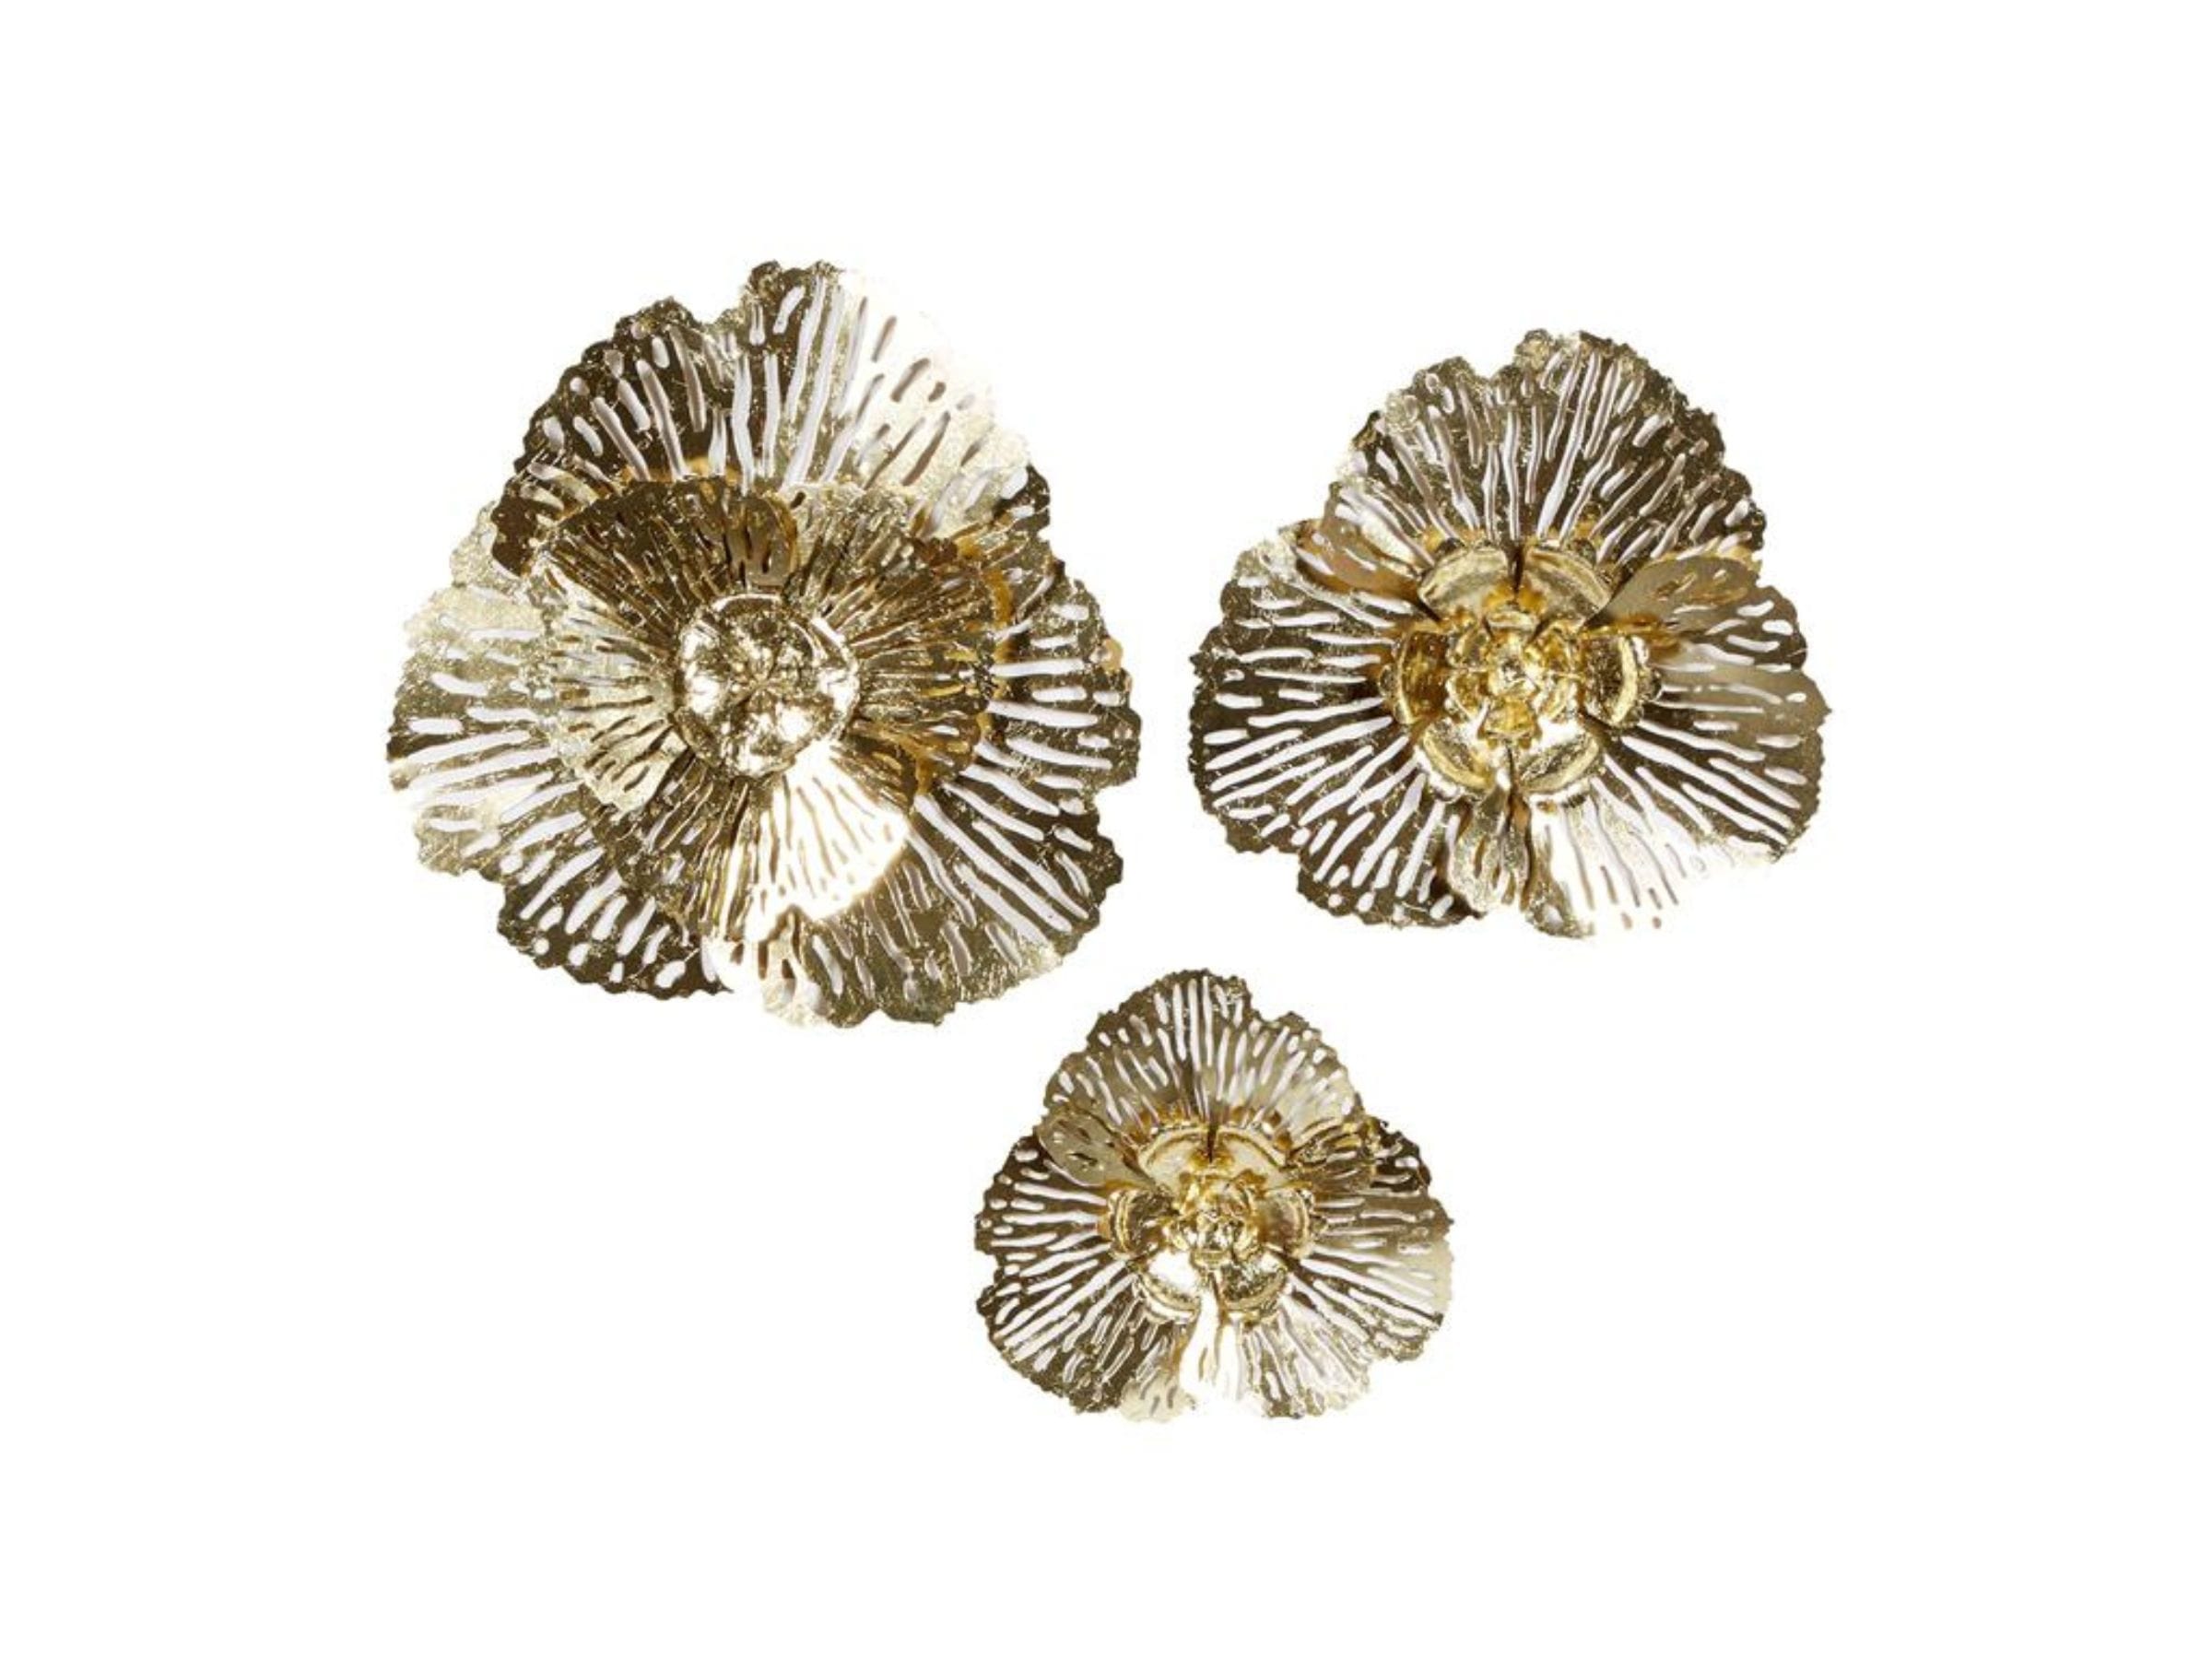 Set of 3 Gold Metal Flowers Wall Decor 18/24/29"H